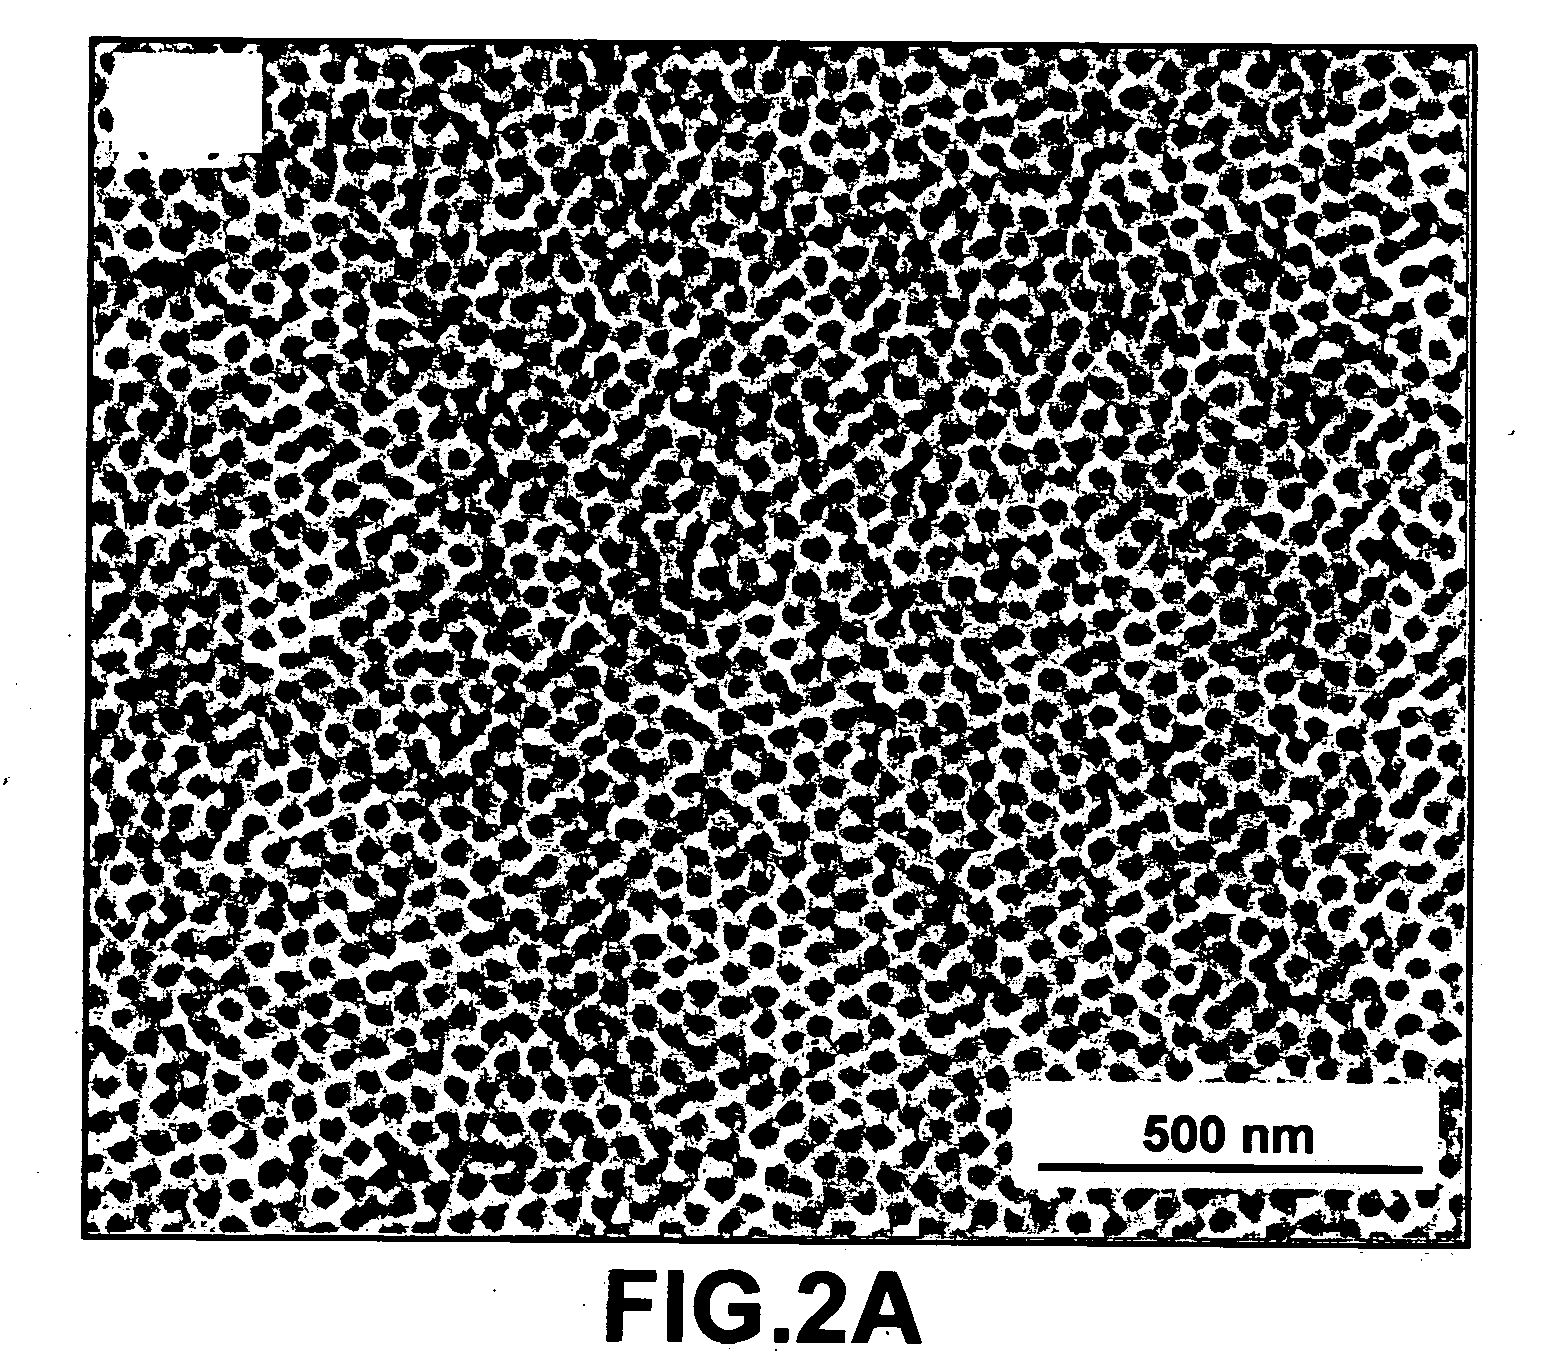 Nonvolatile memory device using semiconductor nanocrystals and method of forming same